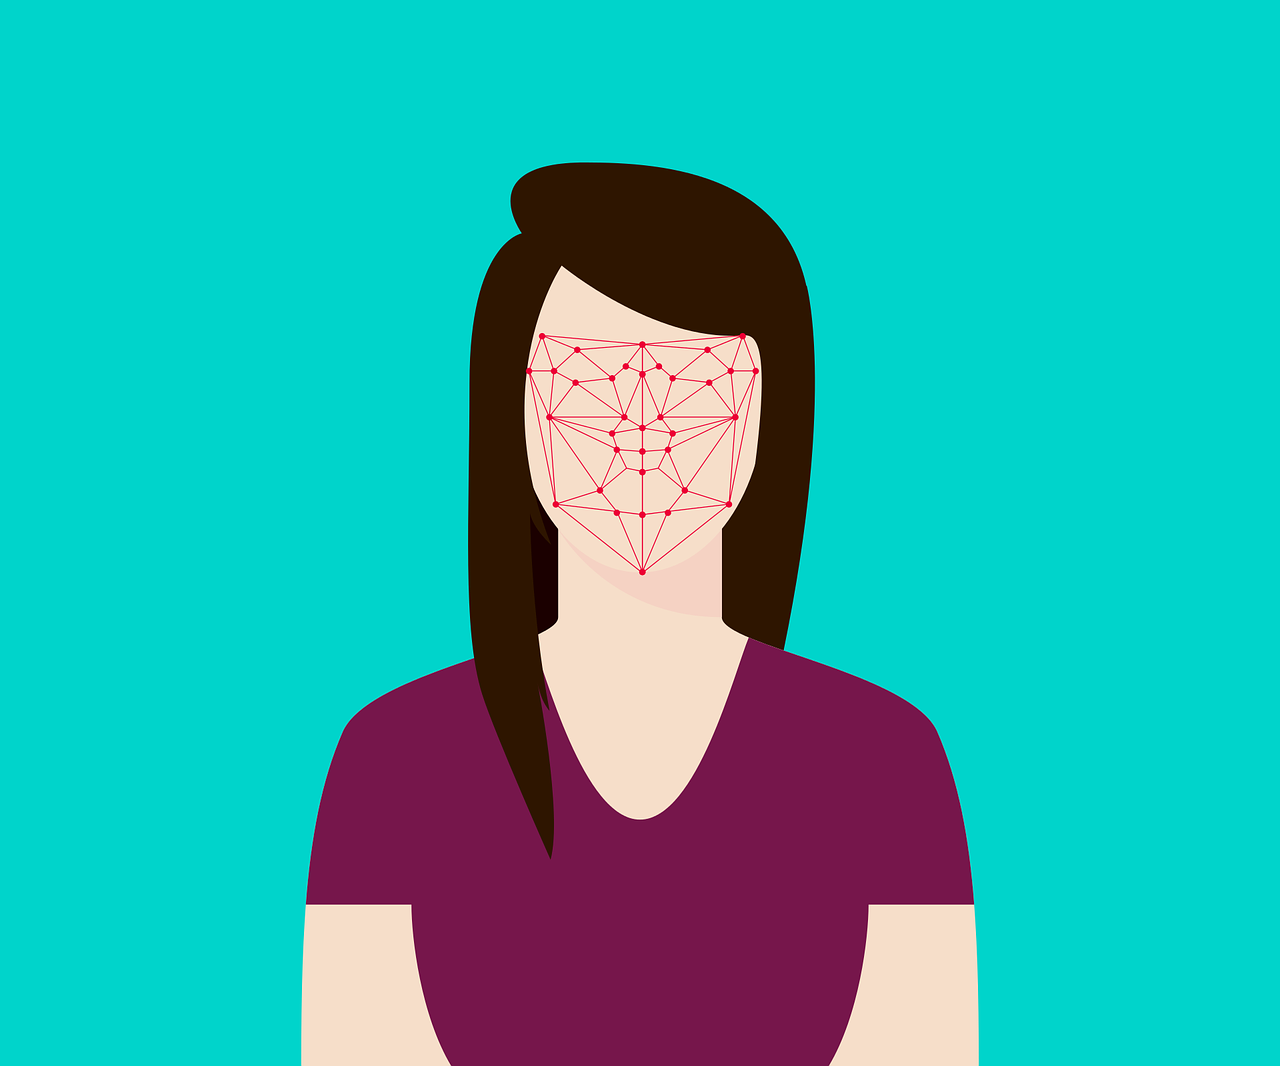 OPINION: Facial recognition in schools should stop before it begins